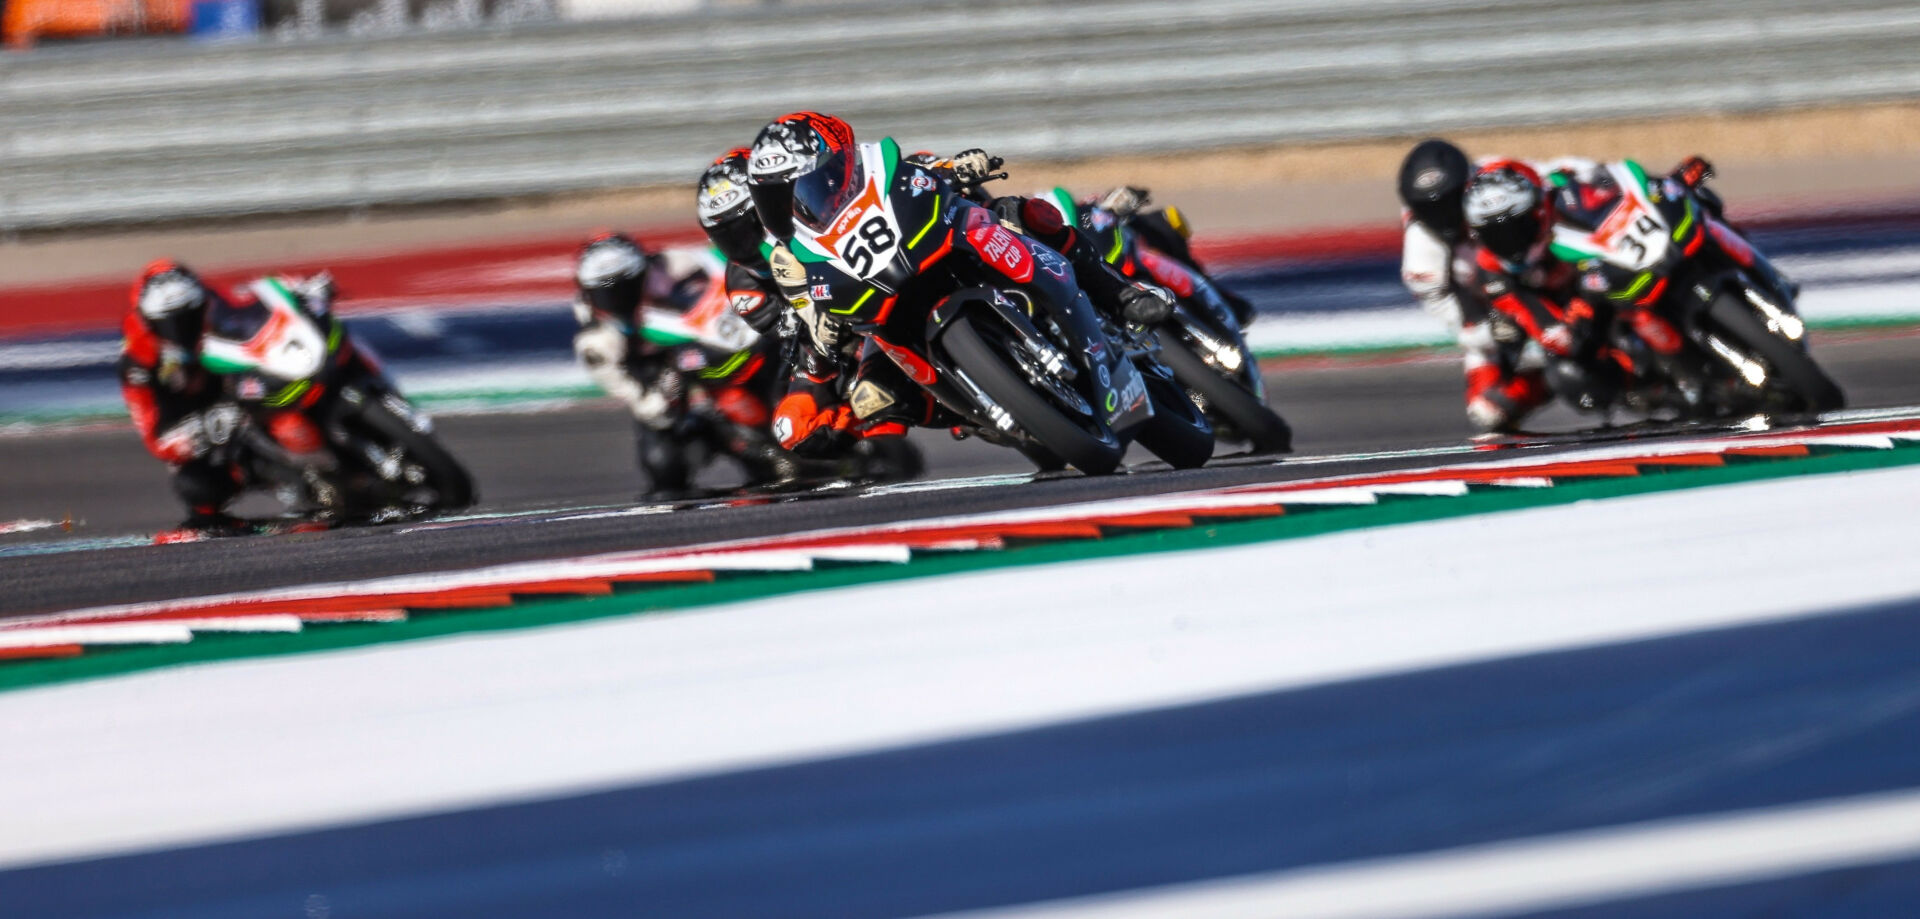 North America Talent Cup competitors in action earlier this year at Circuit of The Americas. Photo by Brian J. Nelson, courtesy NATC.